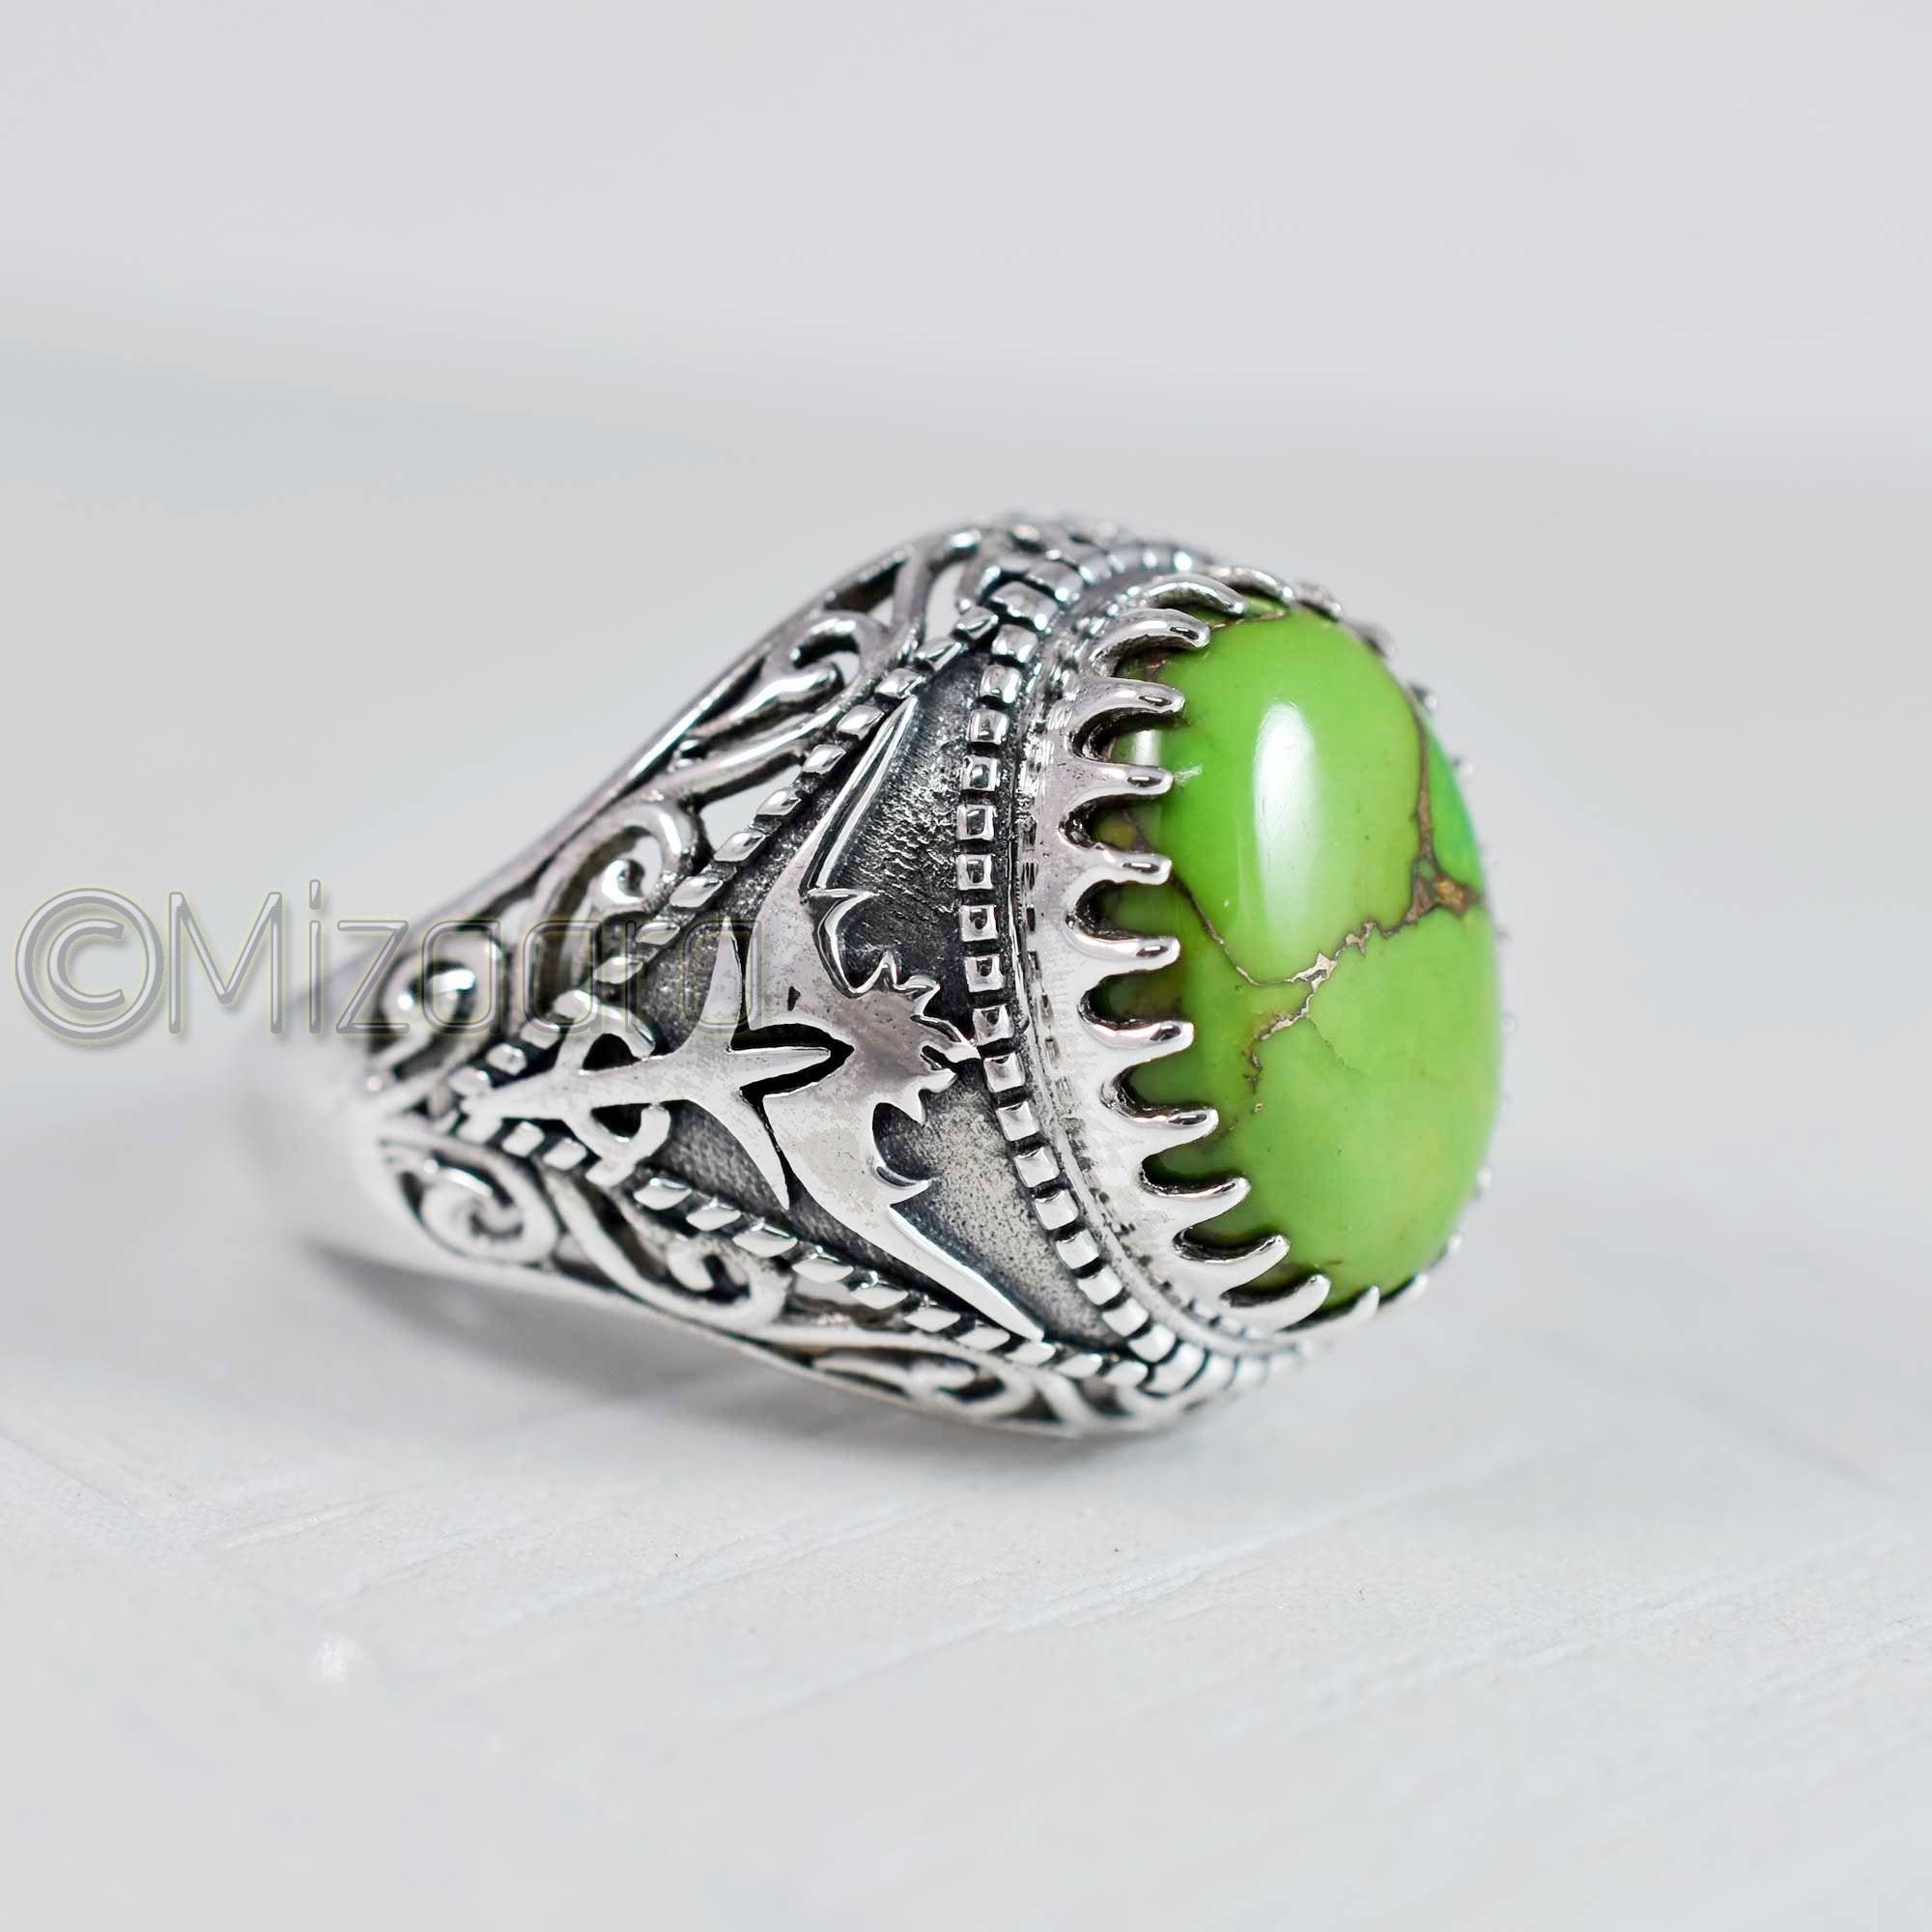 Copper Turquoise Ring 925 Sterling Silver Jewelry Natural Gemstone Green Men's Boys